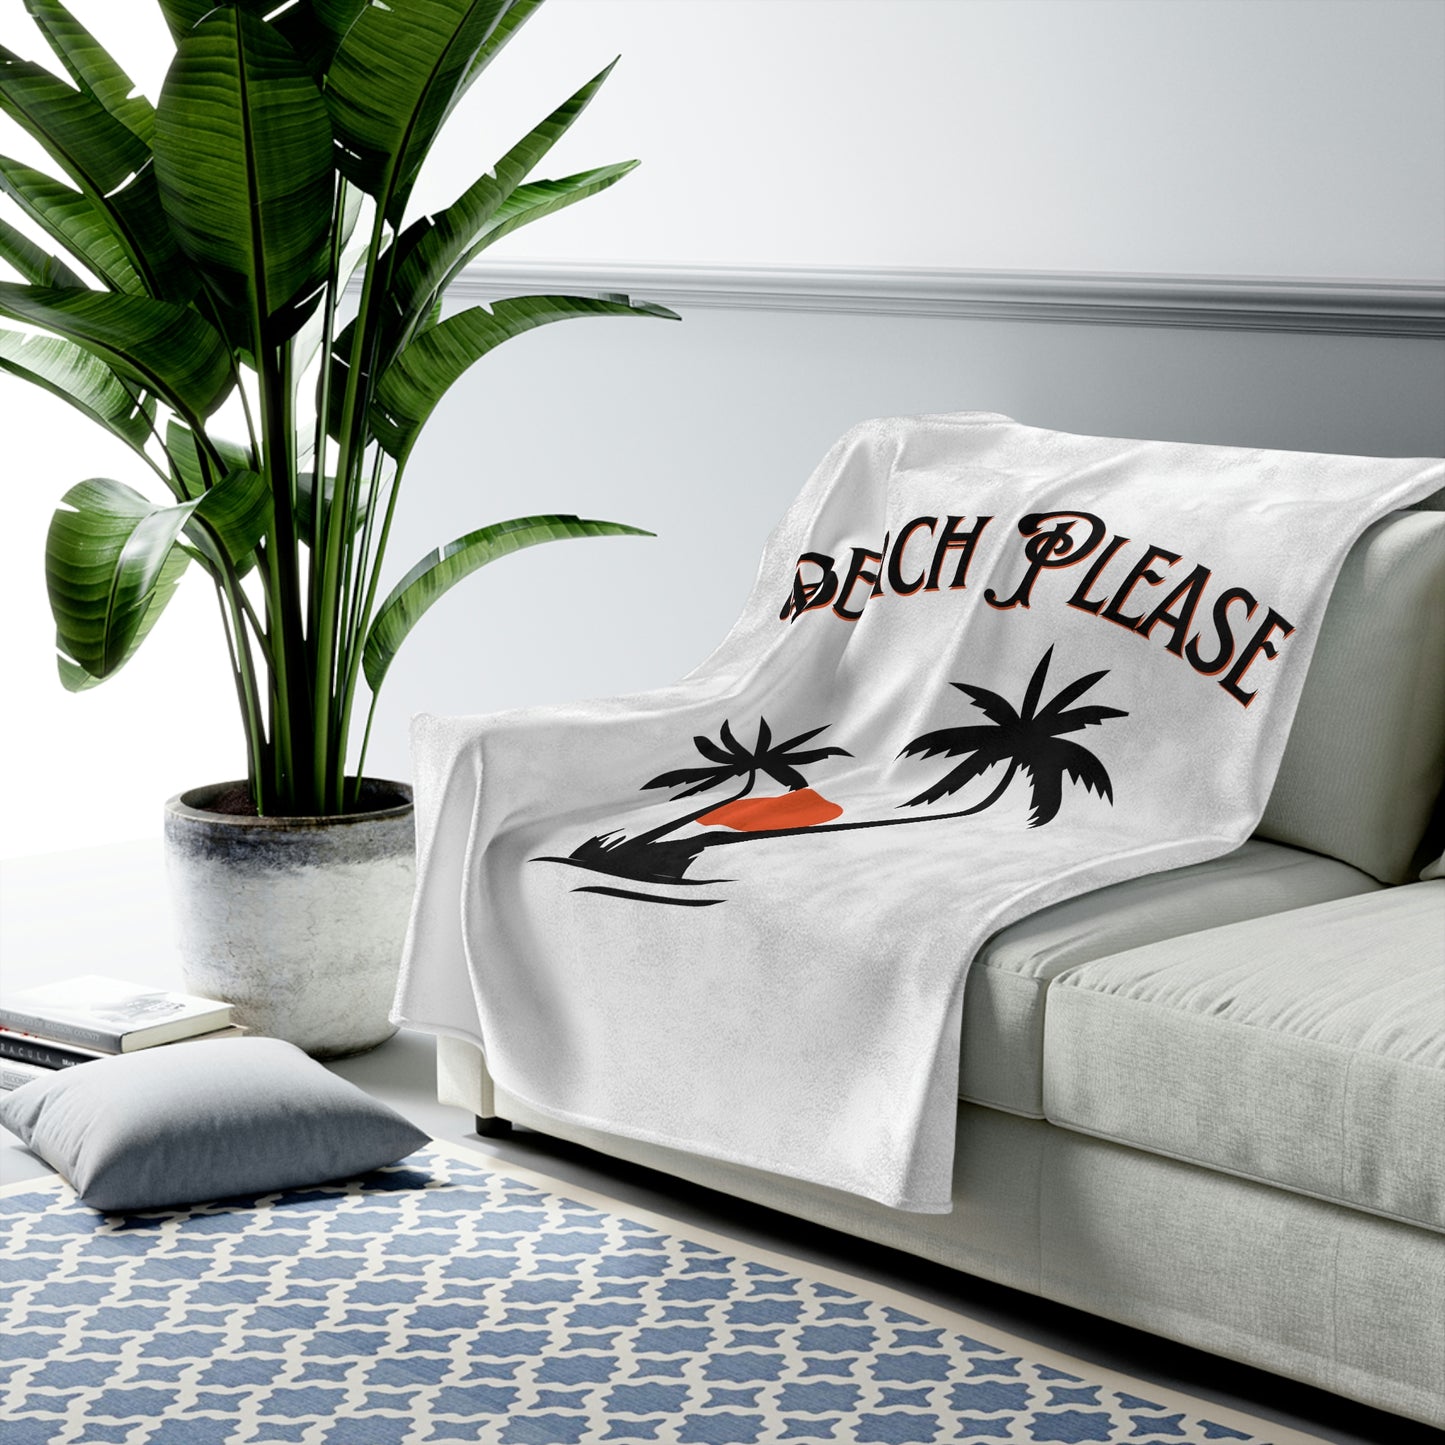 "Beach Please" Blanket - Weave Got Gifts - Unique Gifts You Won’t Find Anywhere Else!